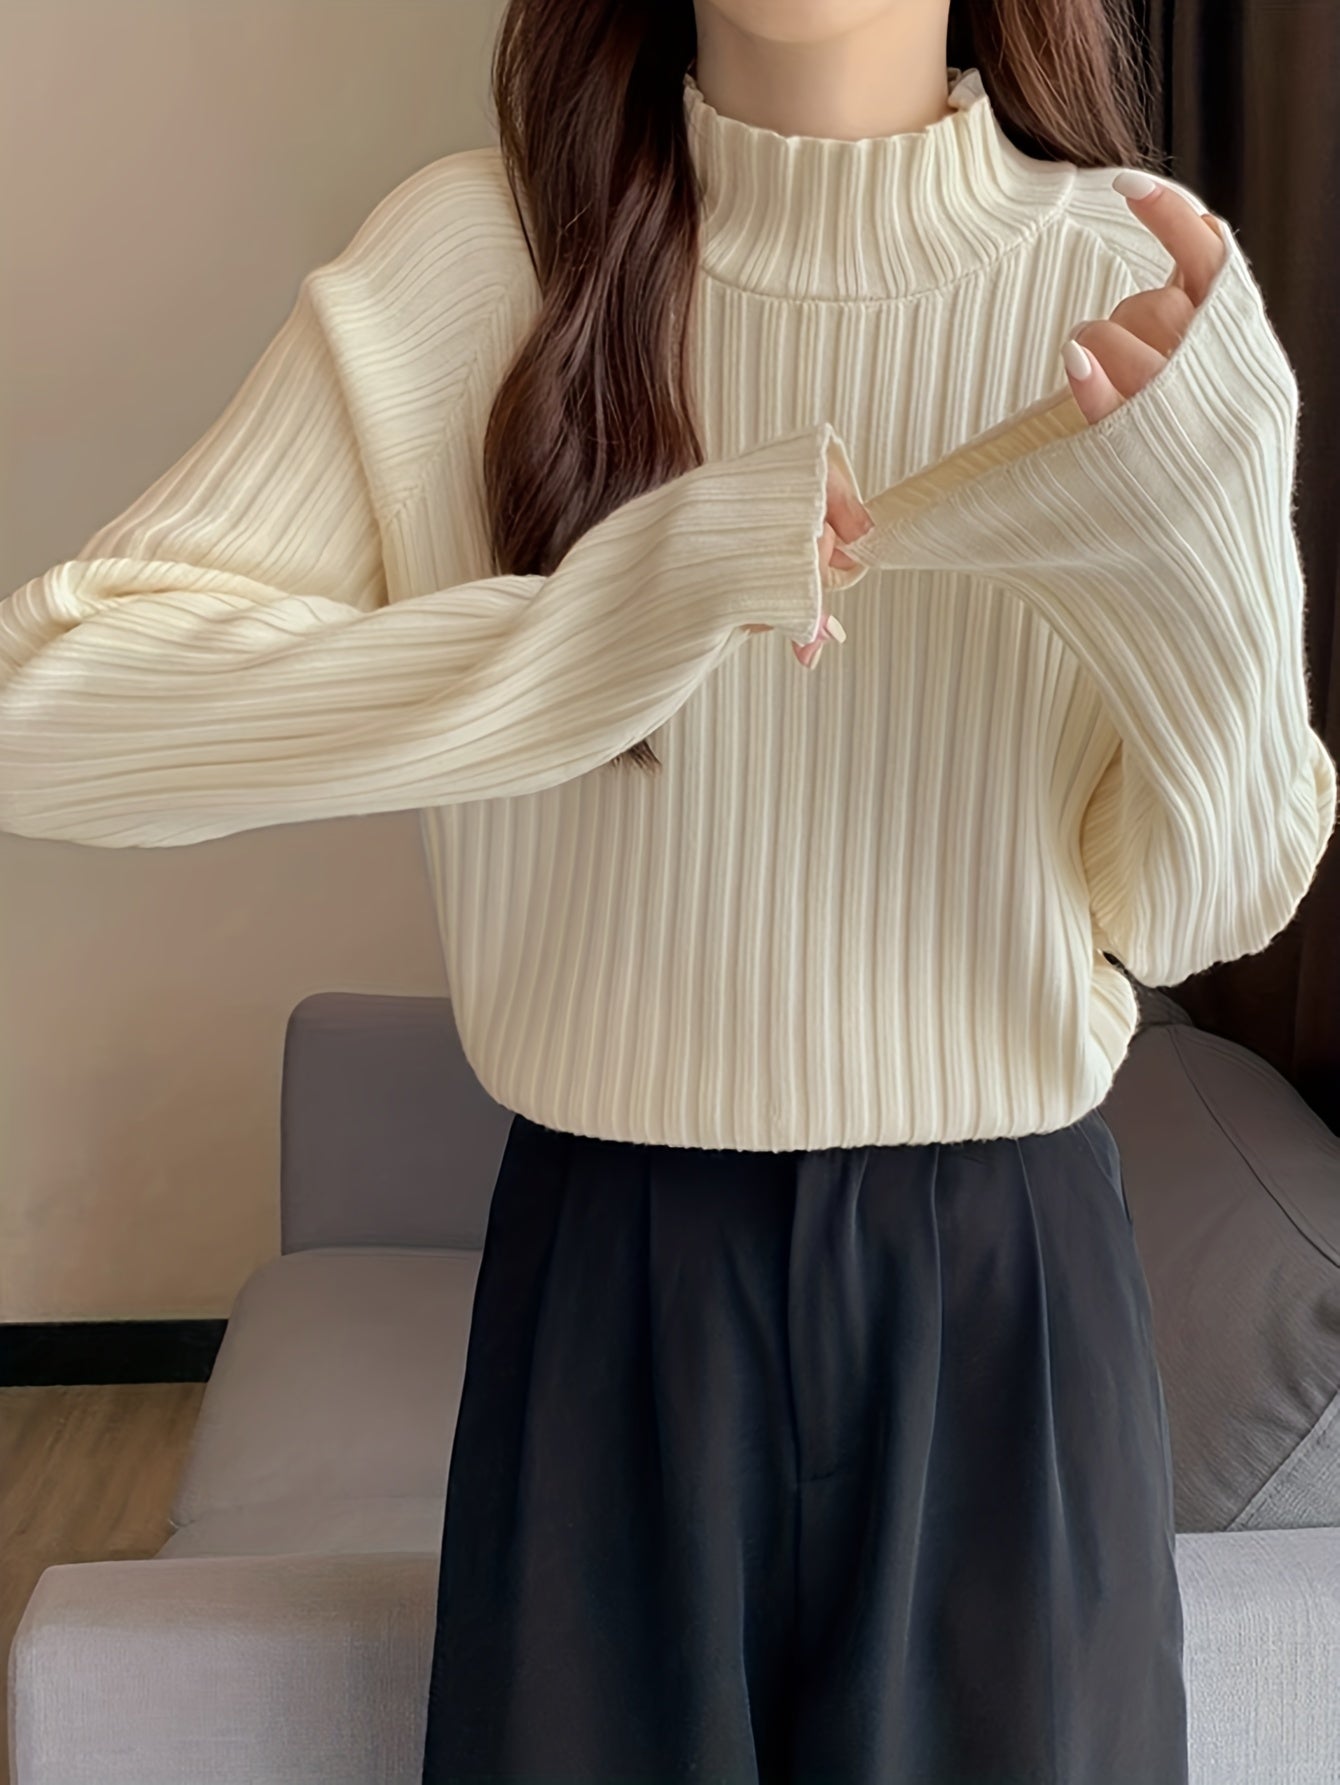 Antmvs Solid Mock Neck Rib Knit Sweater, Casual Long Sleeve Thick Versatile Sweater, Women's Clothing